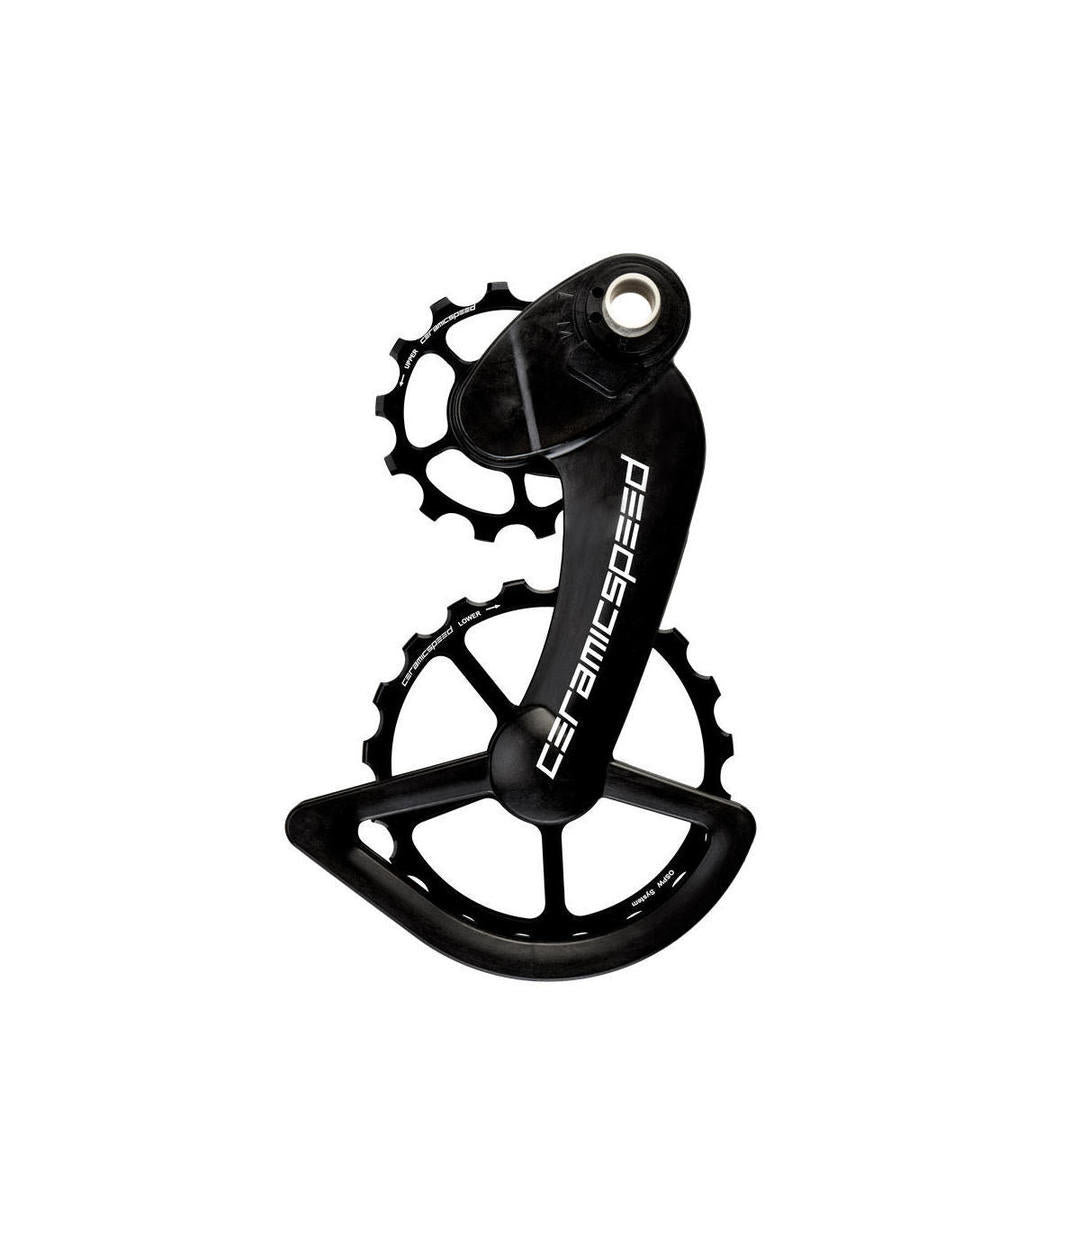 CERAMICSPEED Oversized Pulley CAMPAGNOLO 12s. - Black